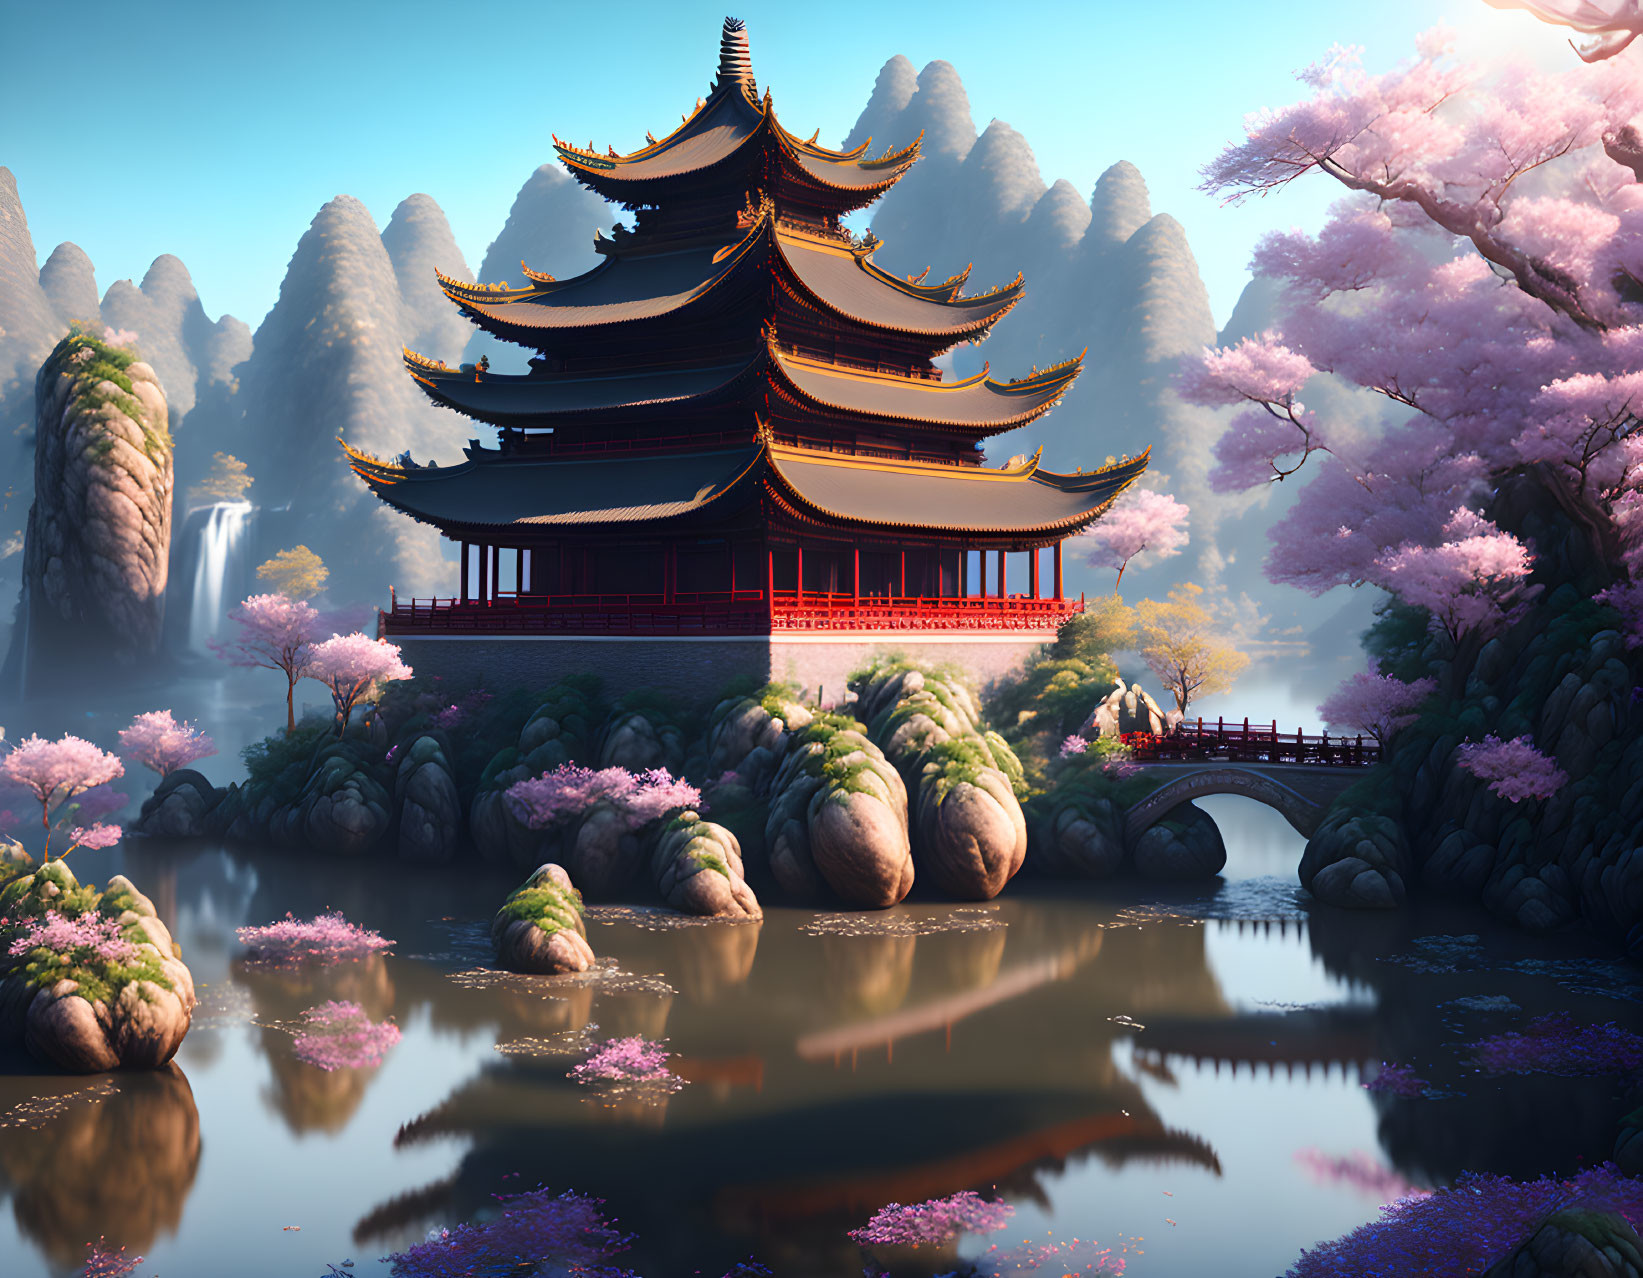 Traditional multi-tiered pagoda in serene landscape with cherry blossoms, lake, bridge, and water